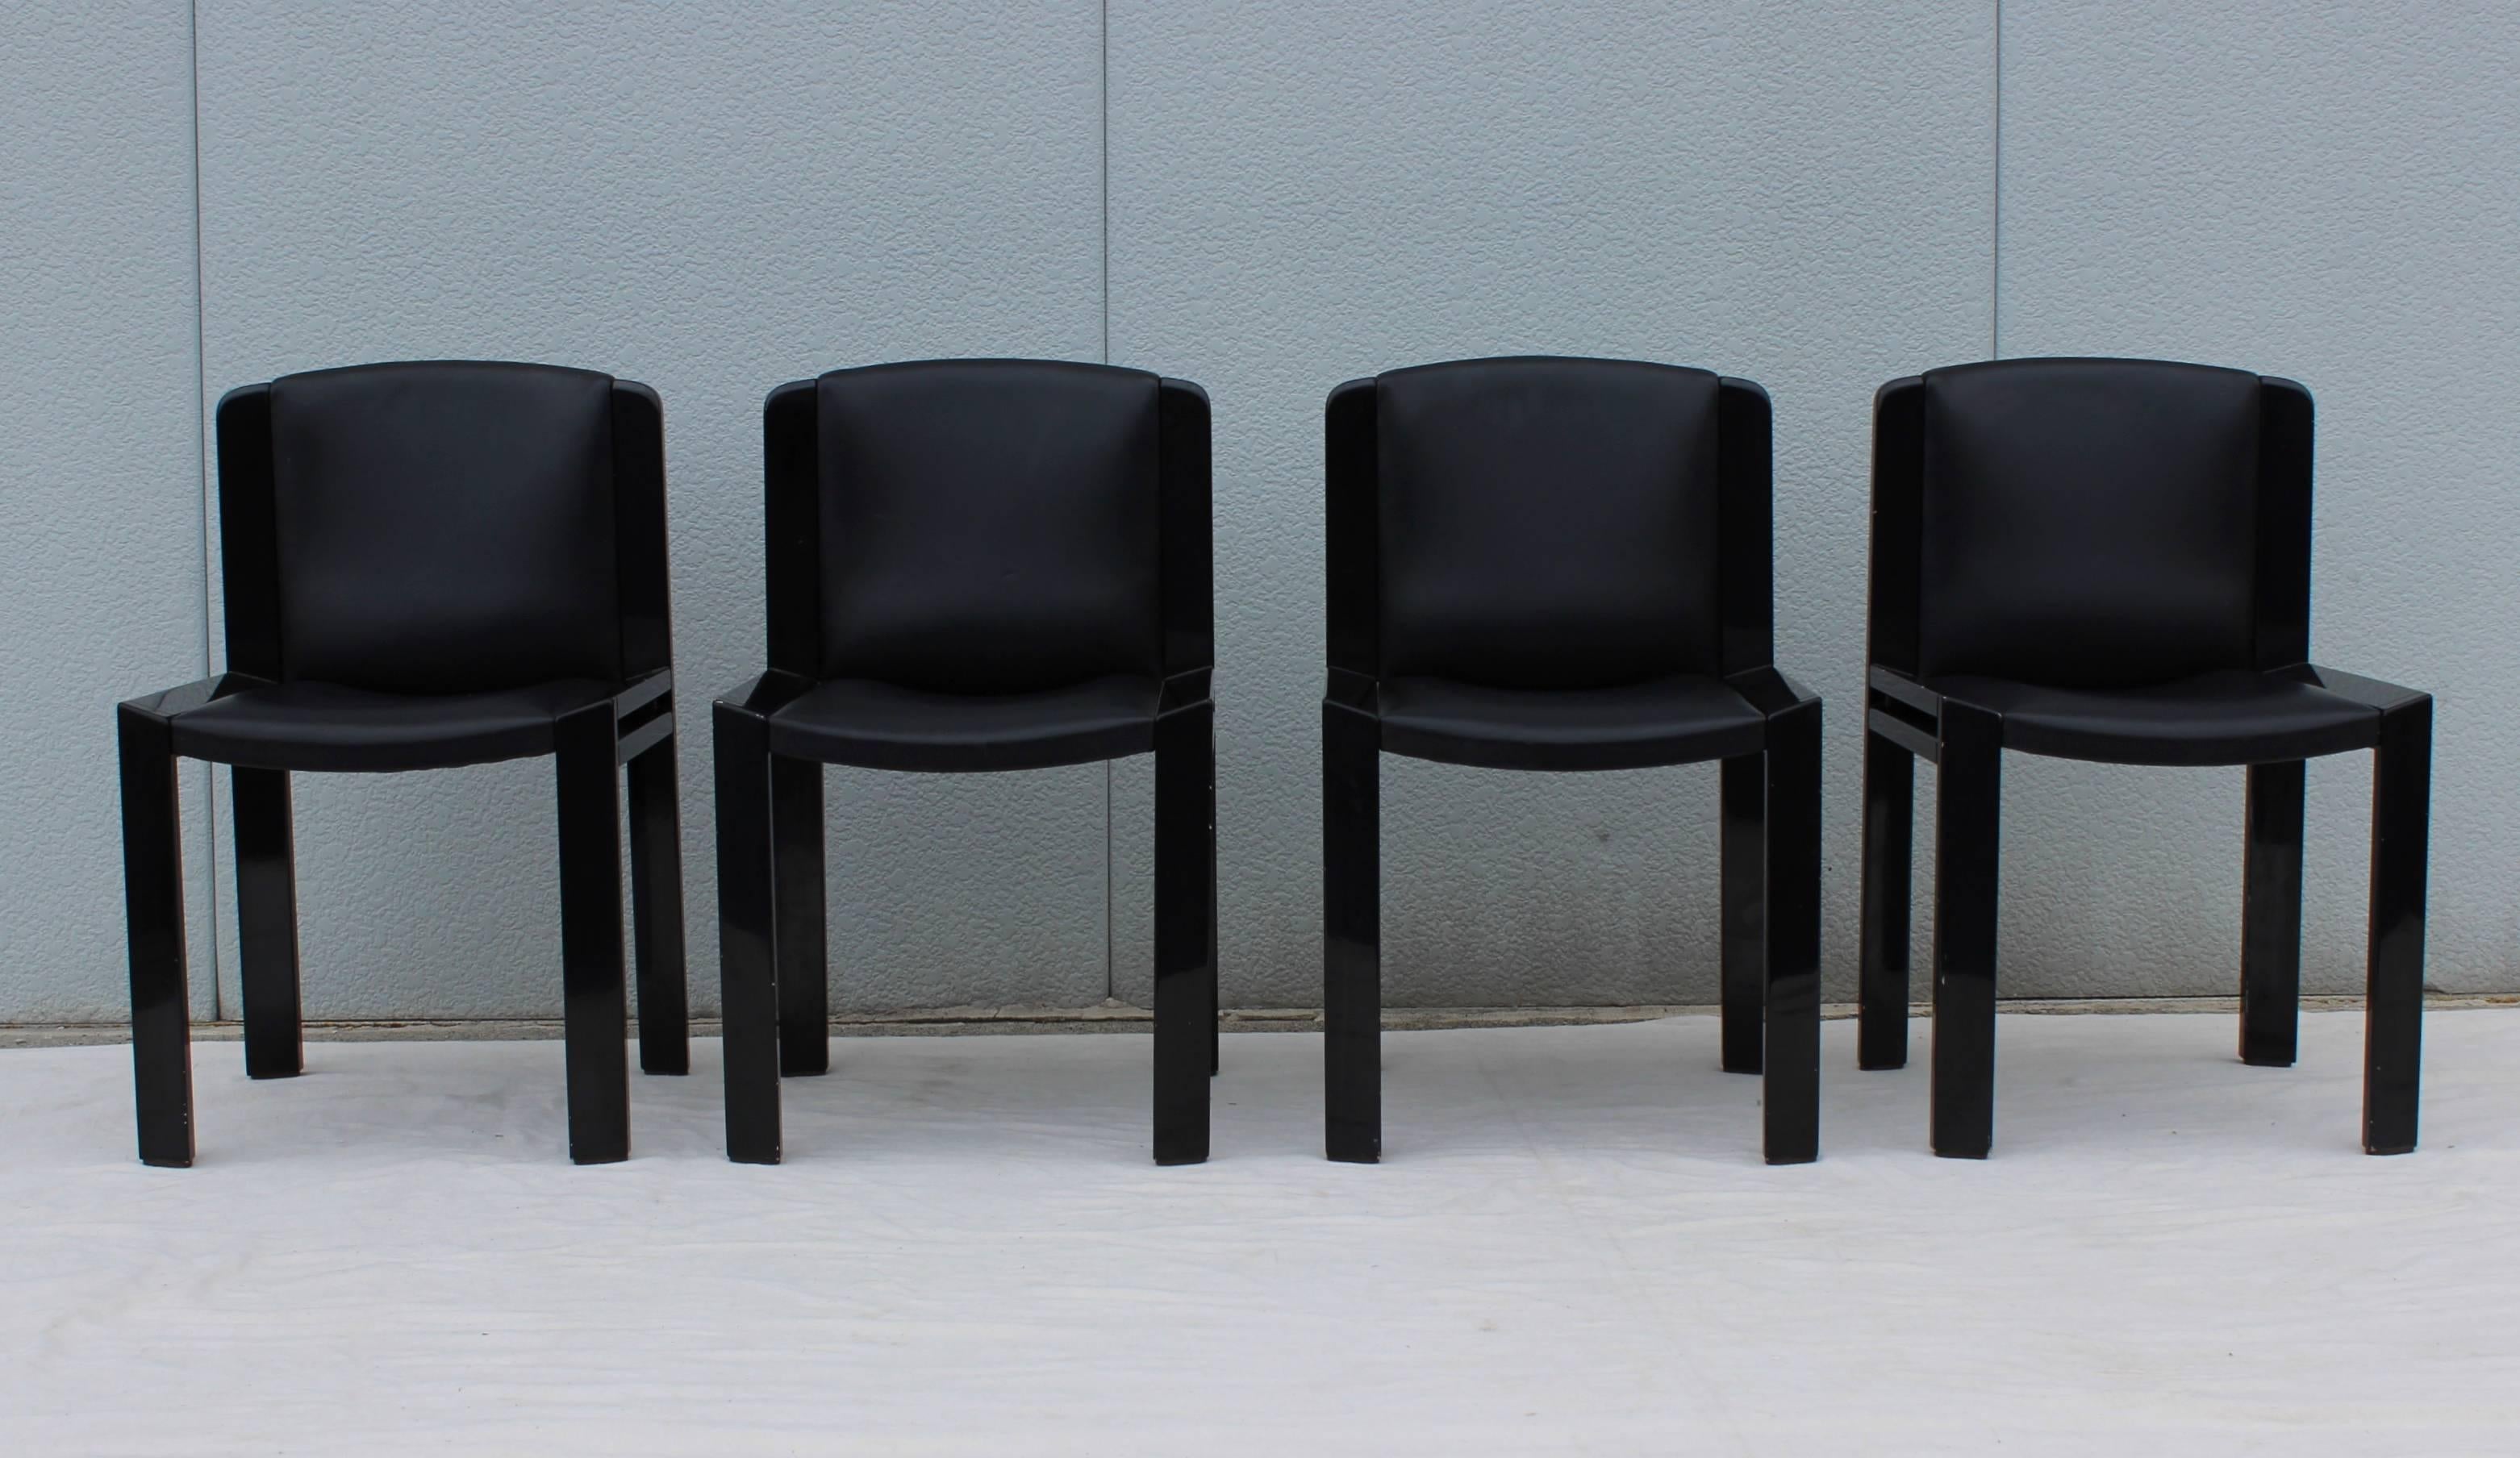 Set of four Joe Colombo For Pozzi model 300 dining chairs, black leather upholstery and lacquered wood frames.